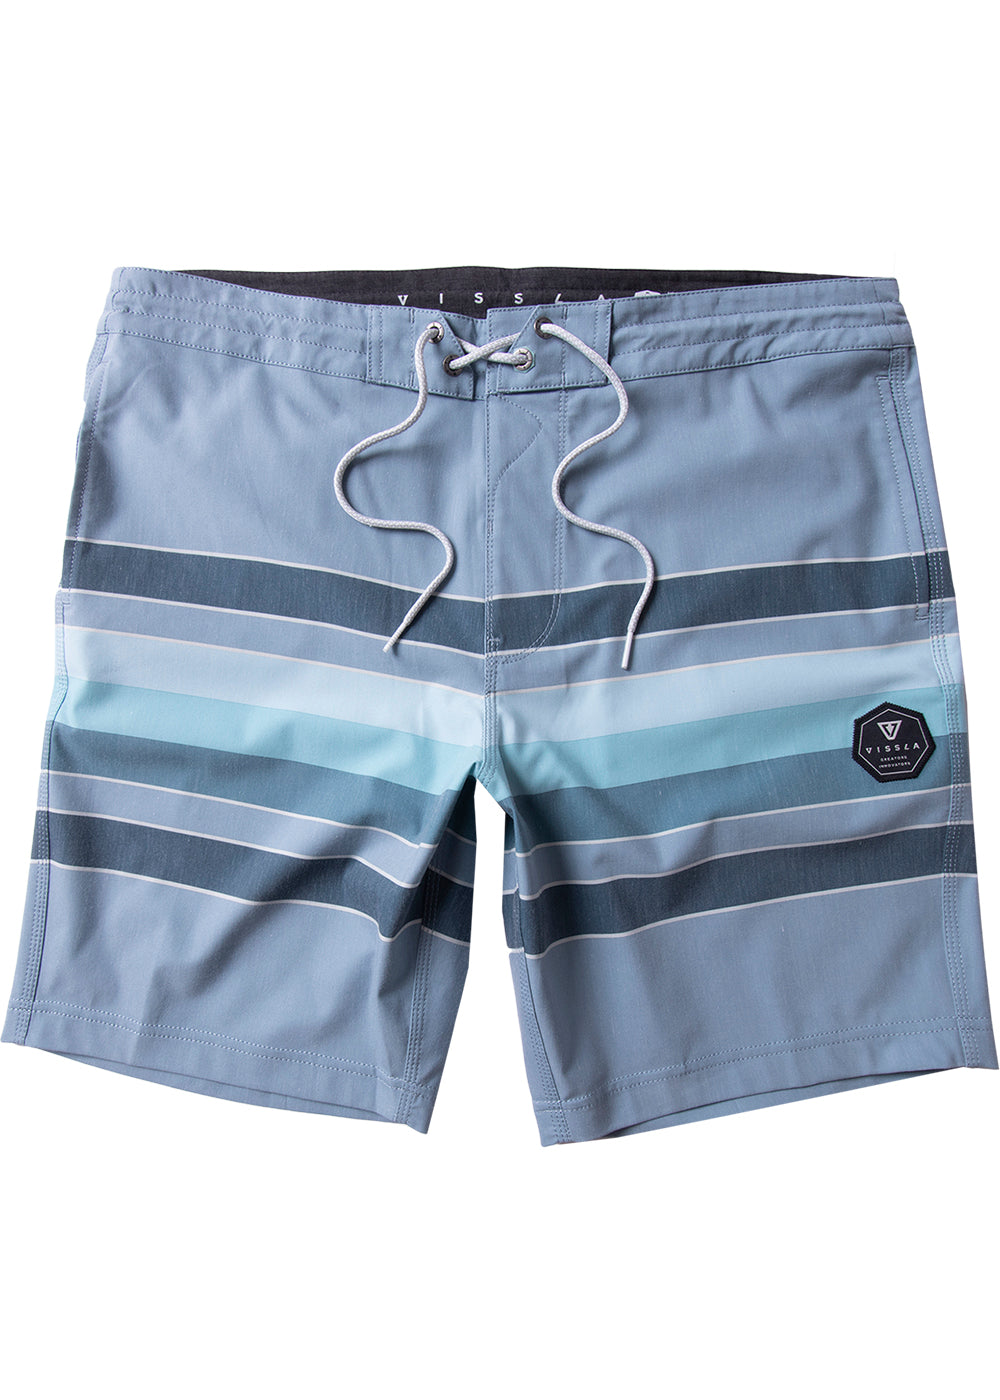 Vissla Men's Fist Bump 18.5" boardshort. Faded denim front view. Includes dark blue and light blue horizontal thick stripes. Front View 